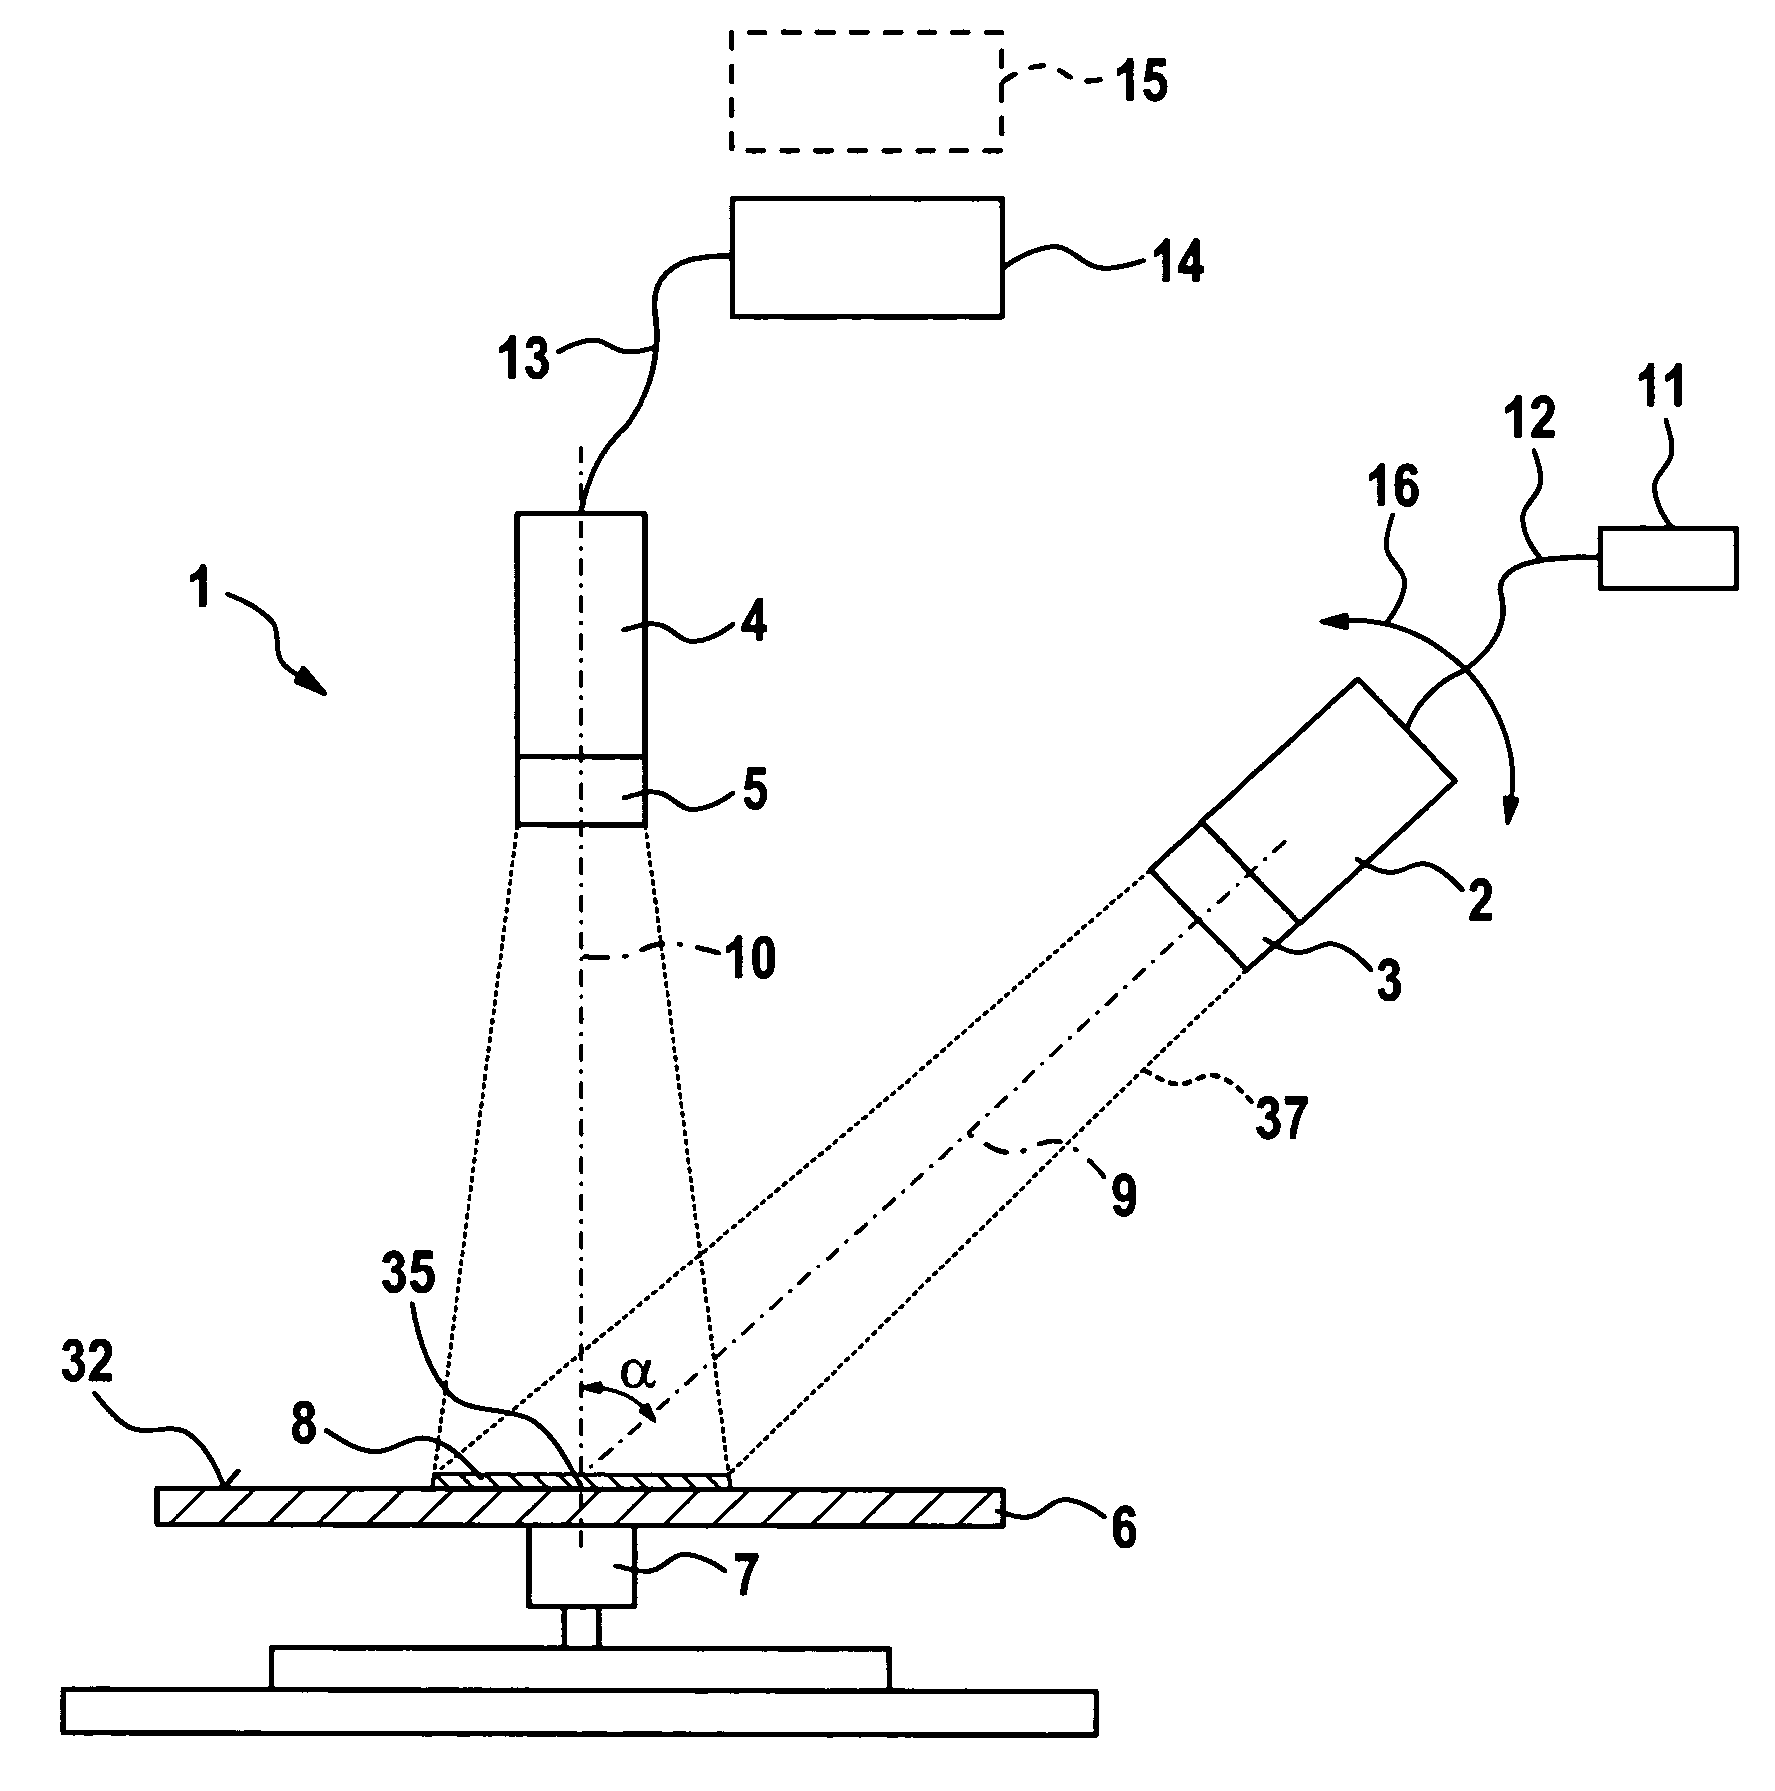 Apparatus for inspection of a wafer